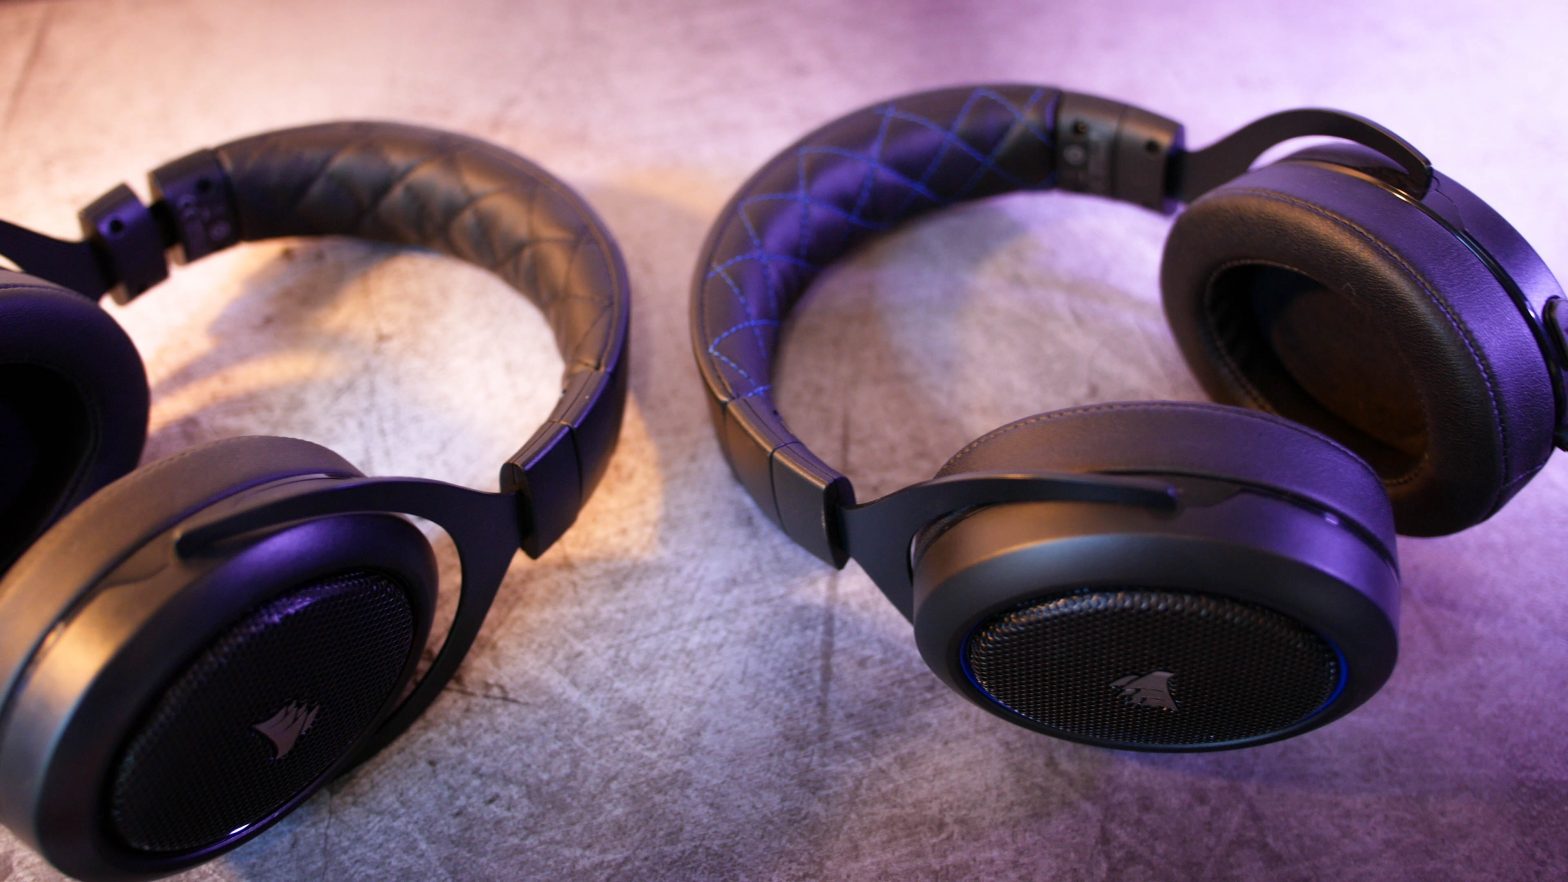 Top 5 Best Corsair Gaming Headsets for PC in 2019